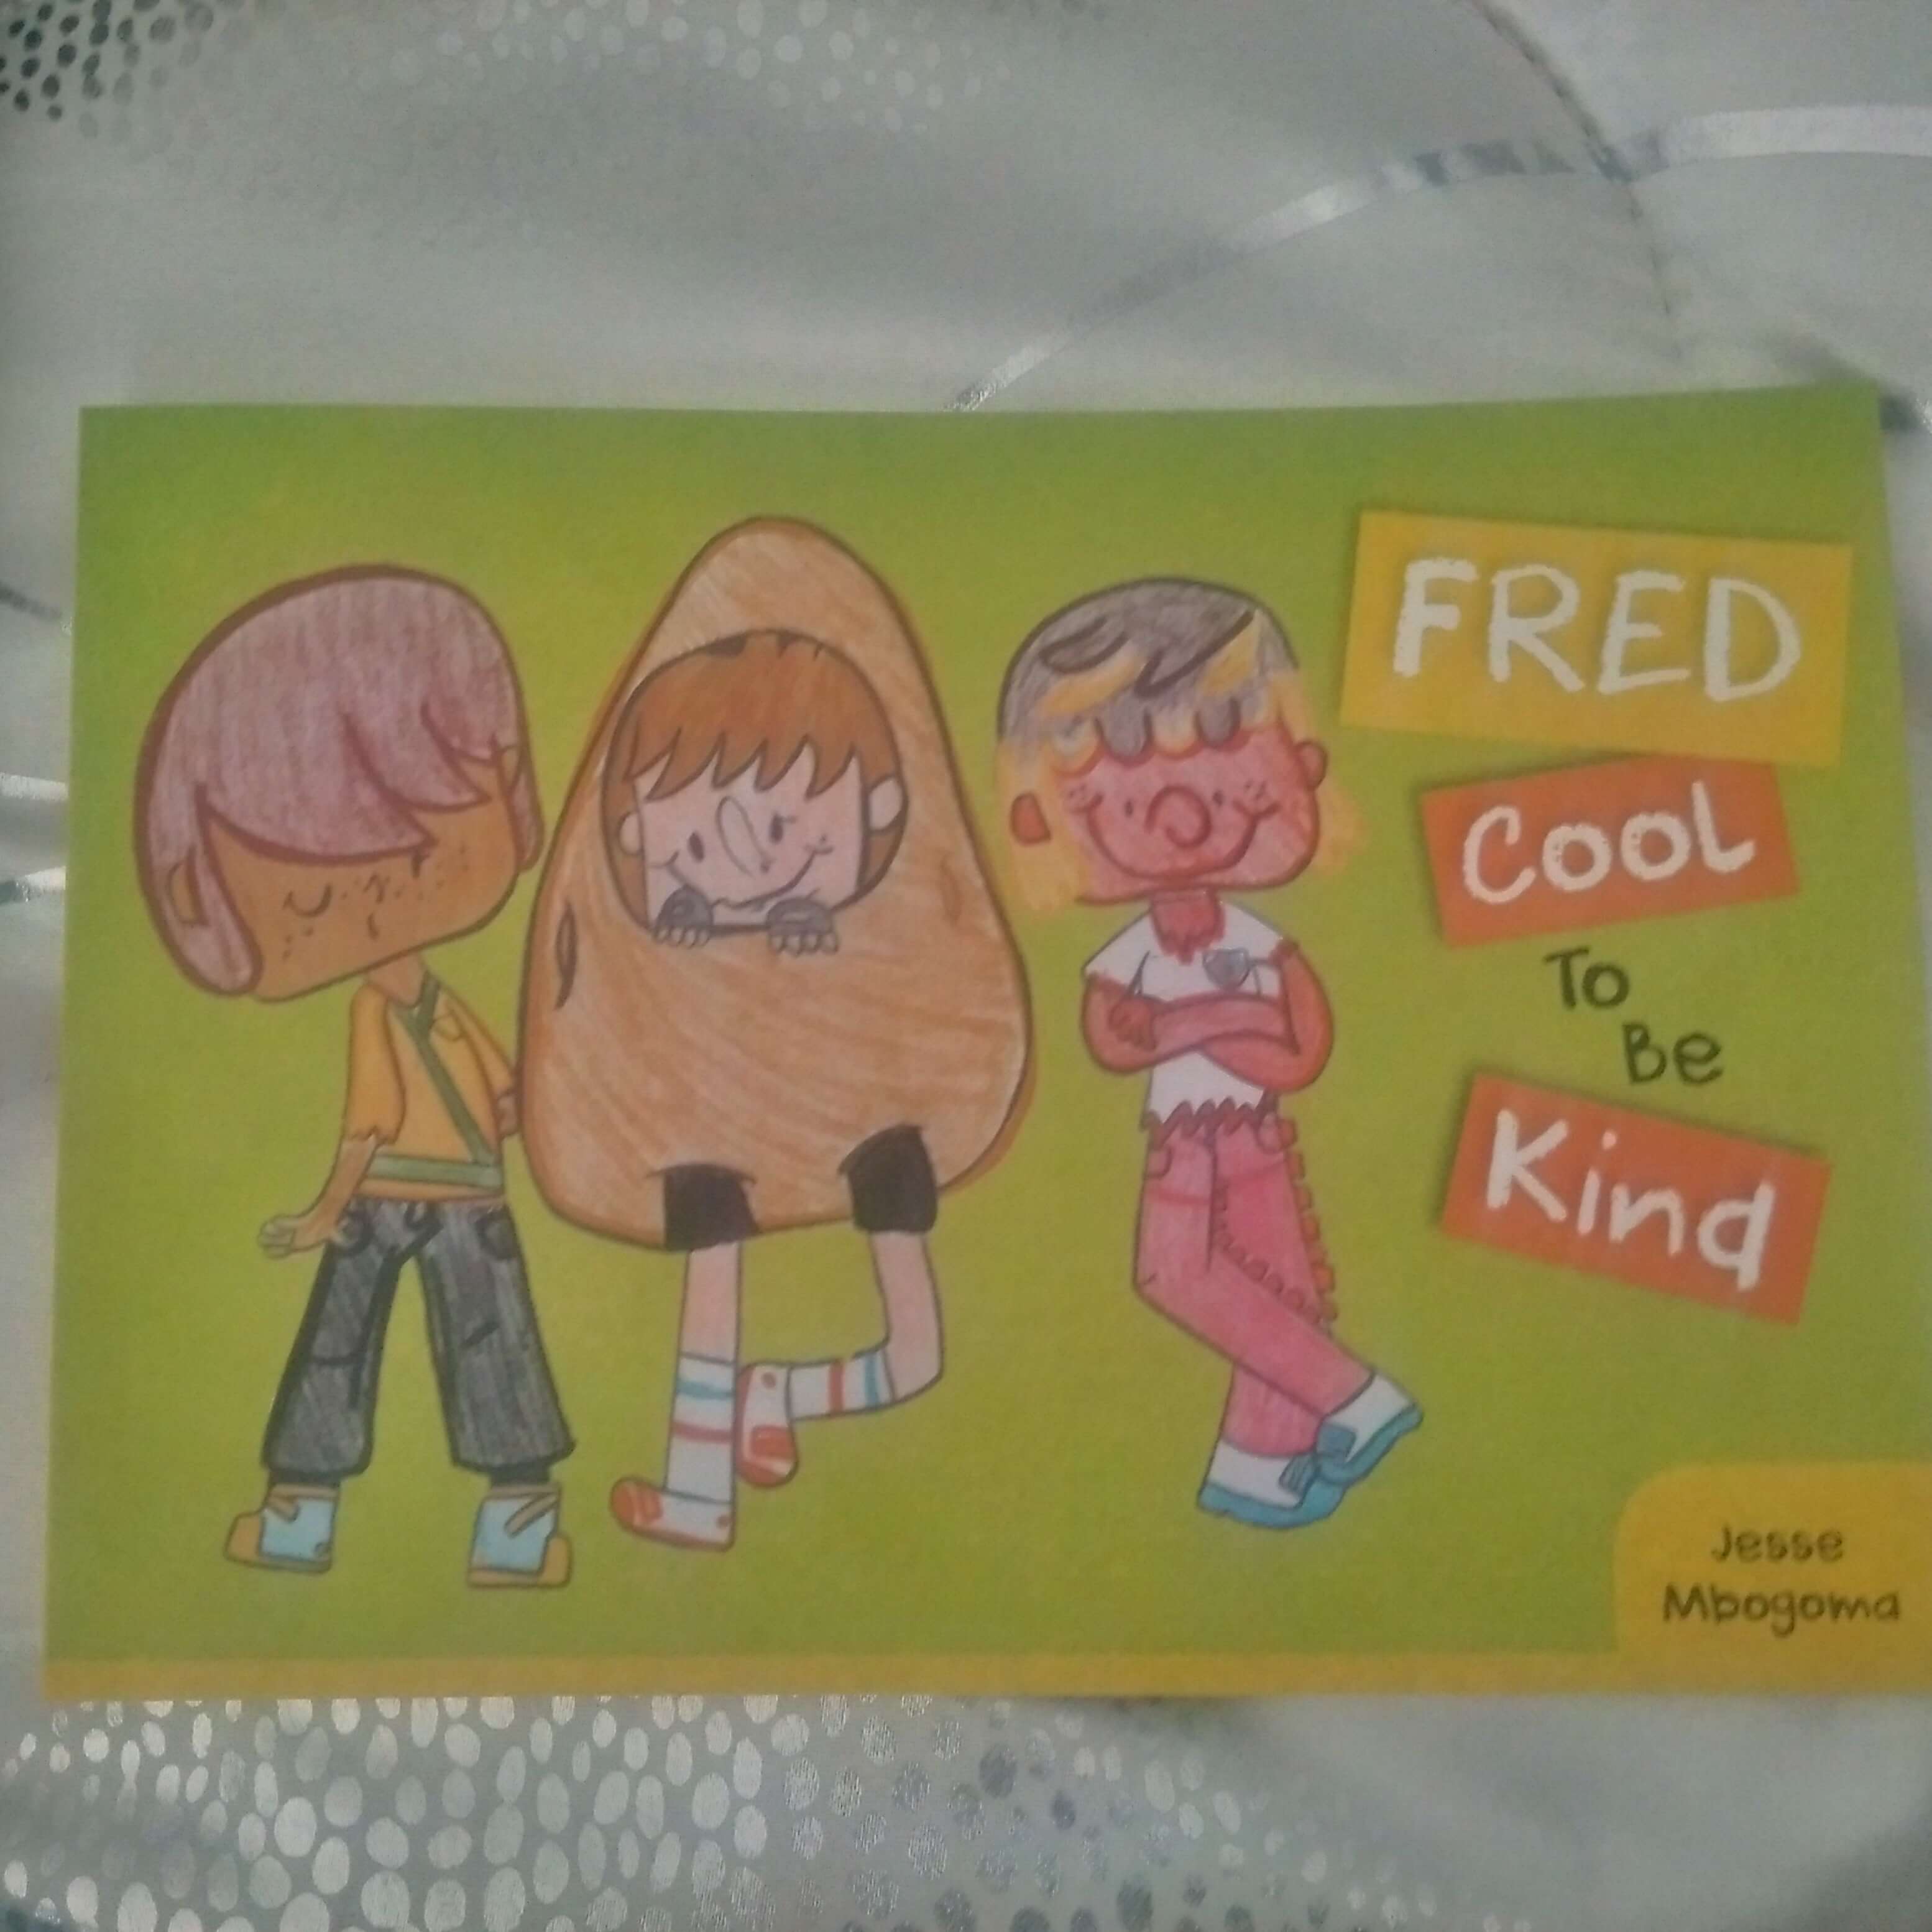 fred-cool-to-be-kind